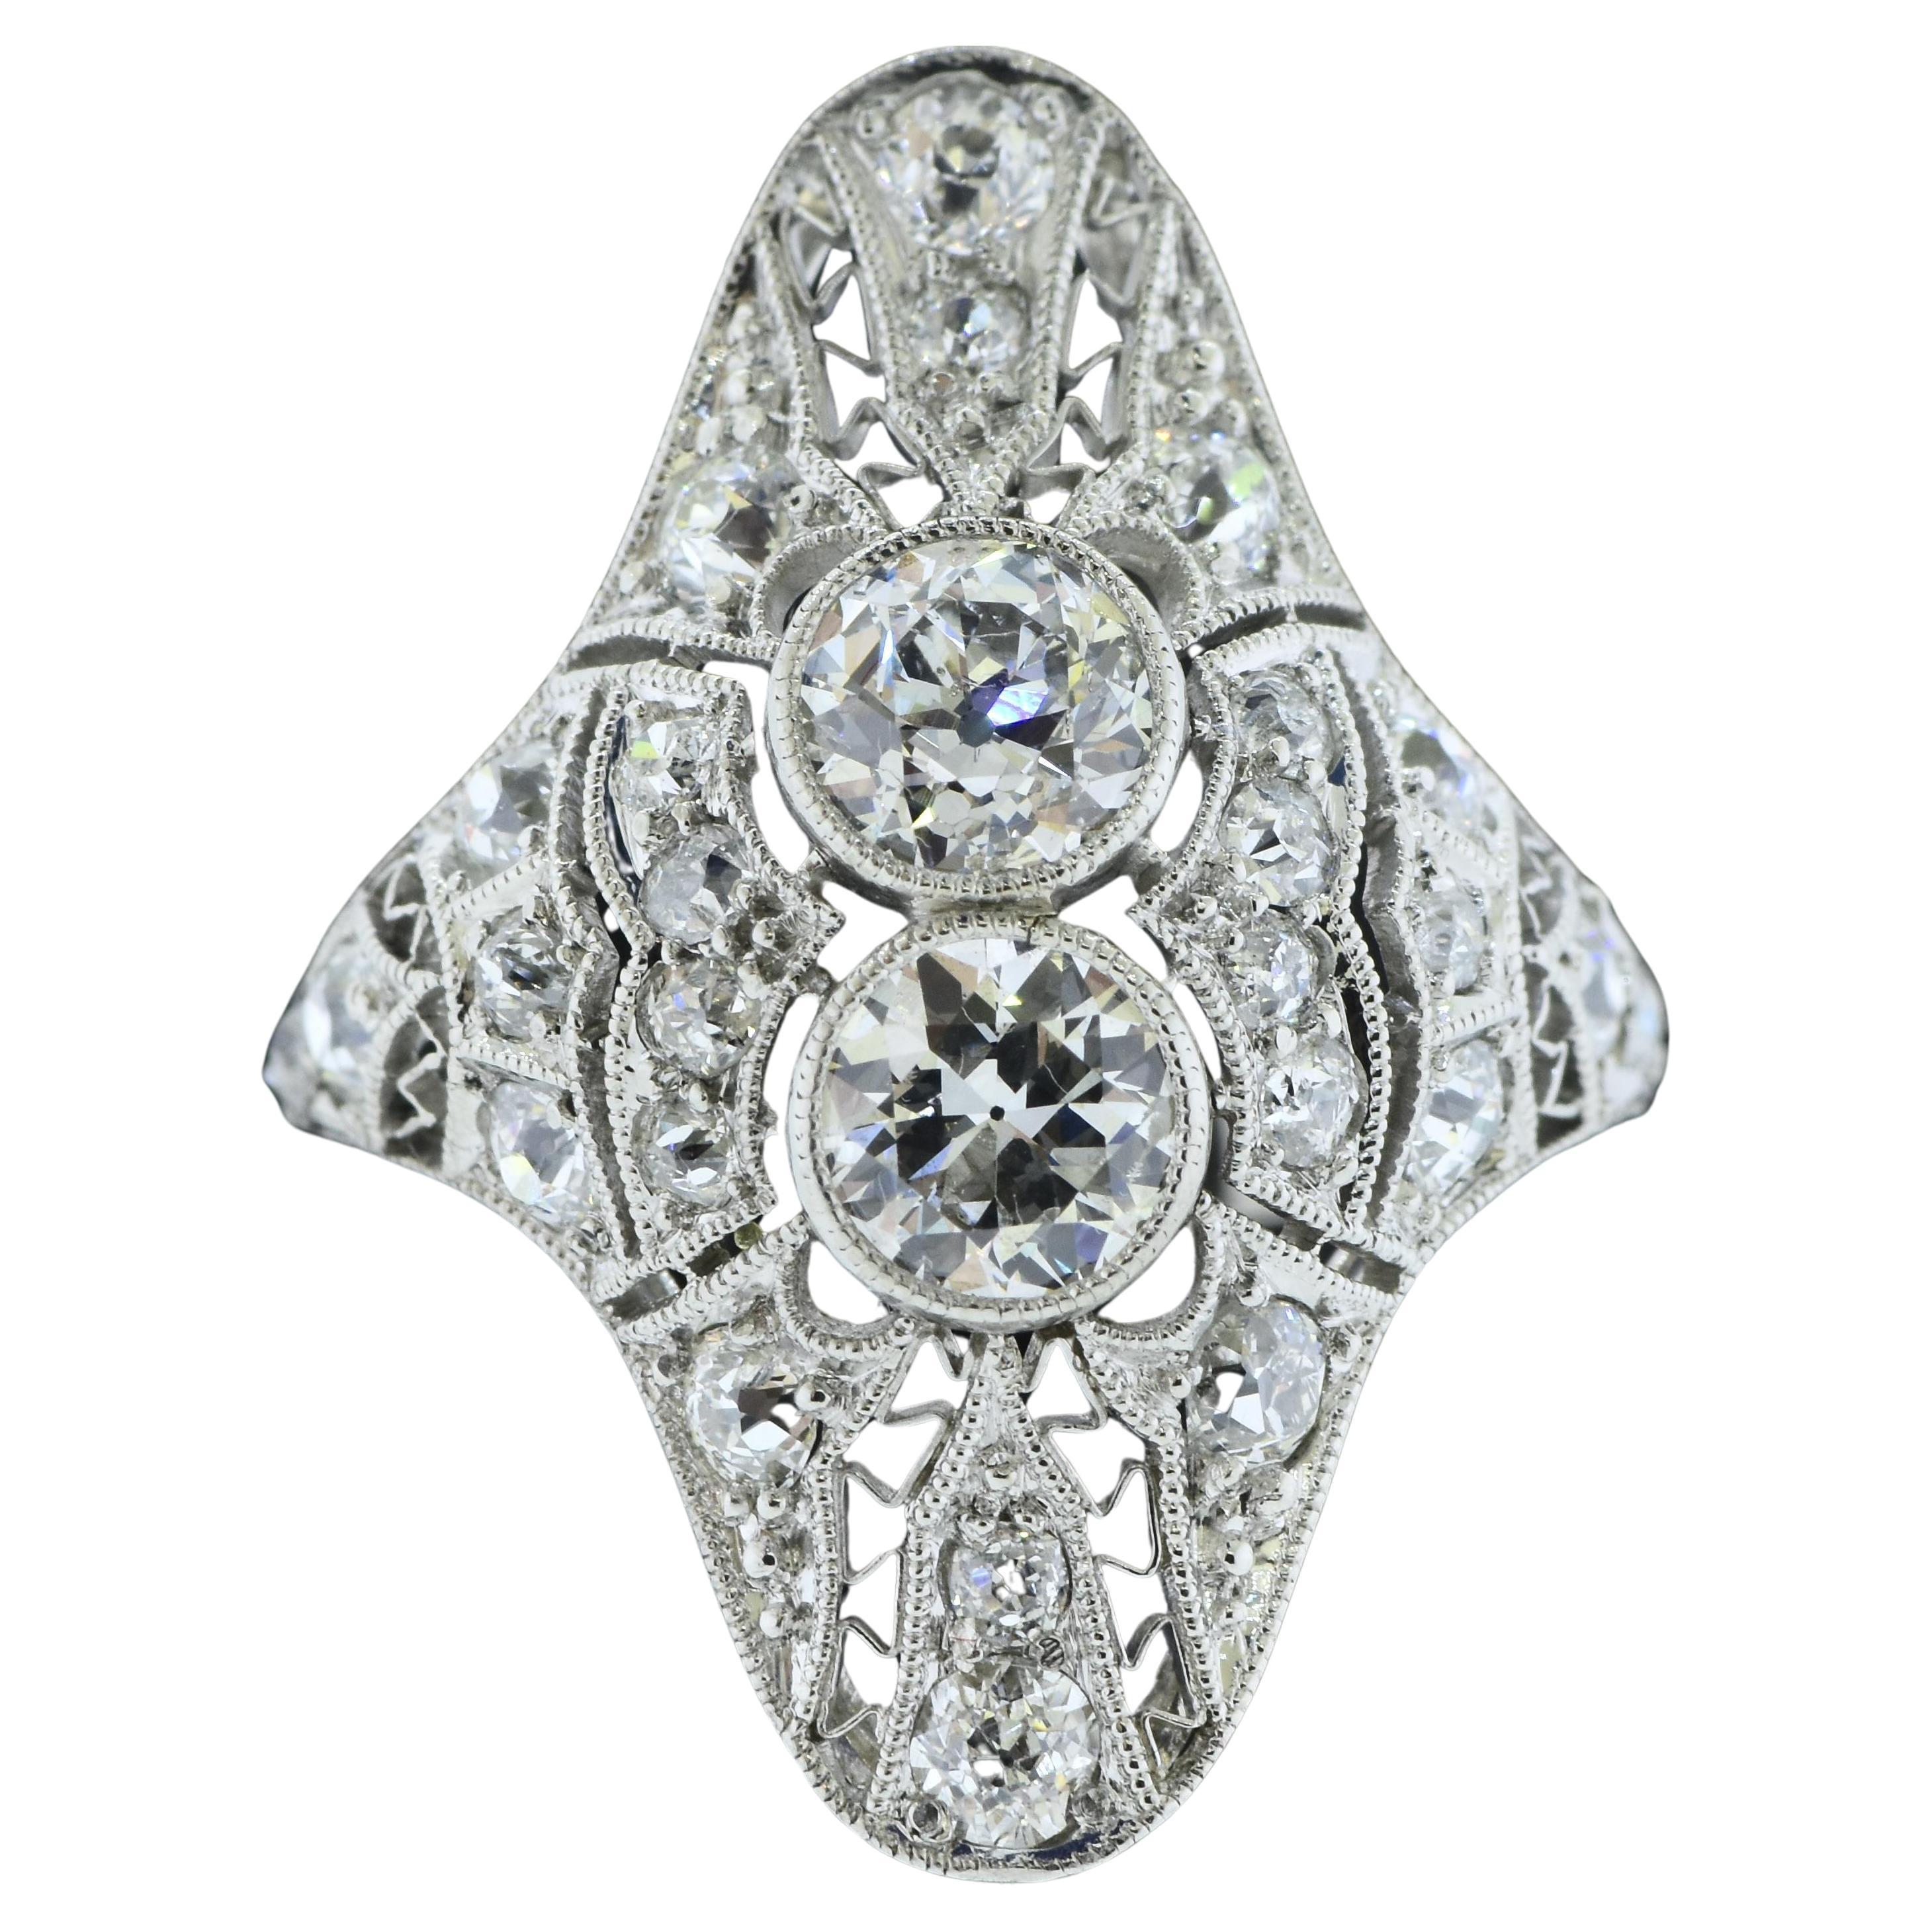 Platinum and diamond antique ring from the Edwardian time period.  There are 27  early European cut diamonds.  The two larger center diamonds are bezel set in milgrained bezels, the surrounding smaller diamonds (also early European cut diamonds) are